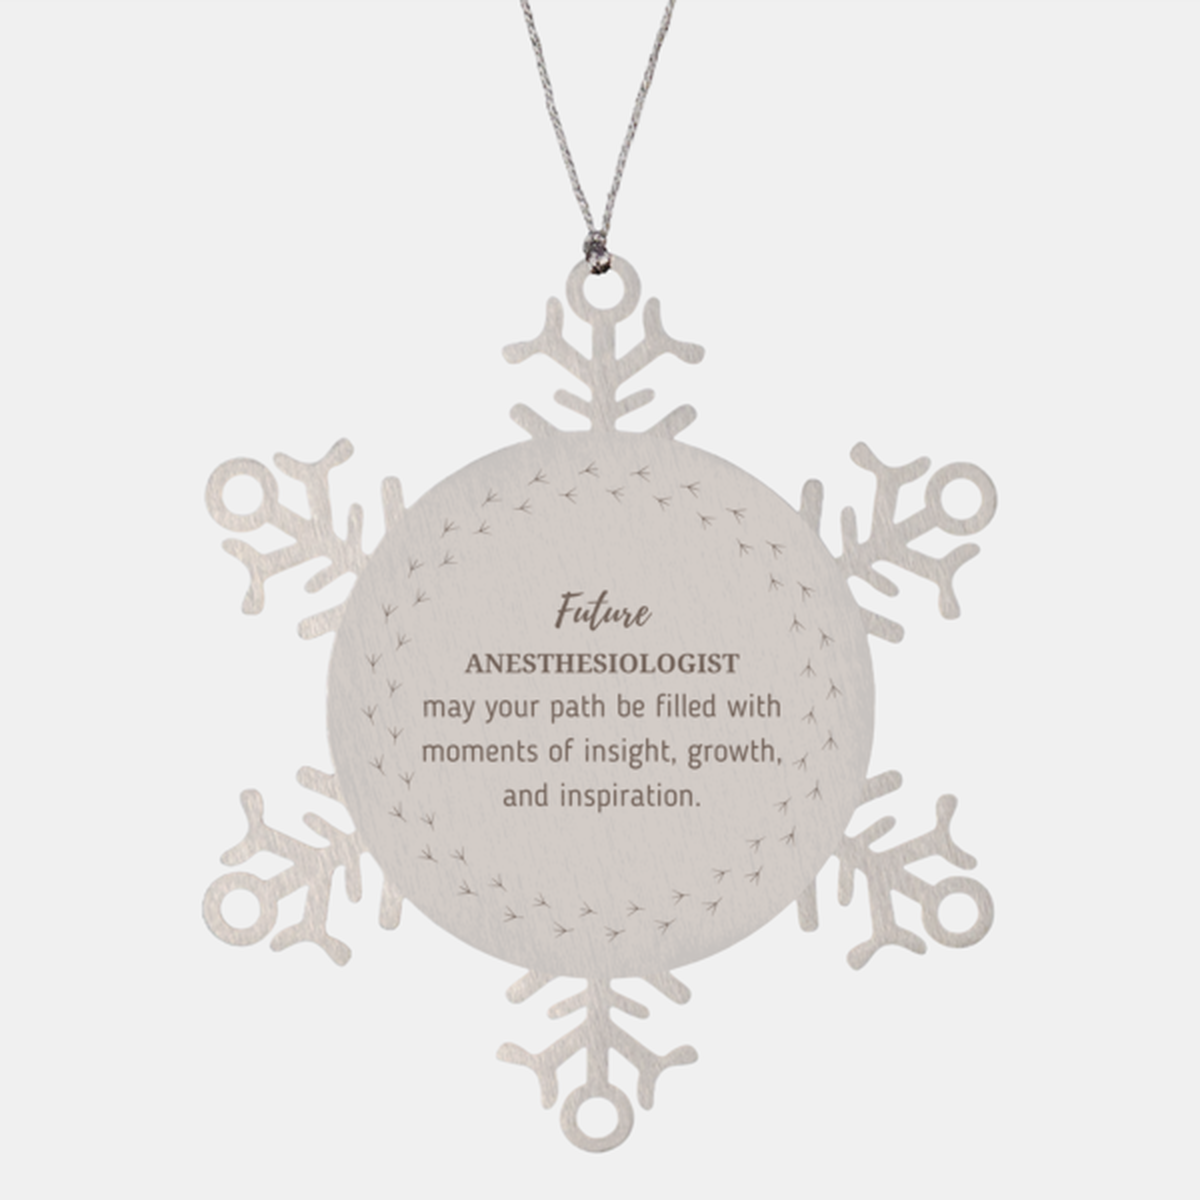 Future Anesthesiologist Gifts, May your path be filled with moments of insight, Graduation Gifts for New Anesthesiologist, Christmas Unique Snowflake Ornament For Men, Women, Friends